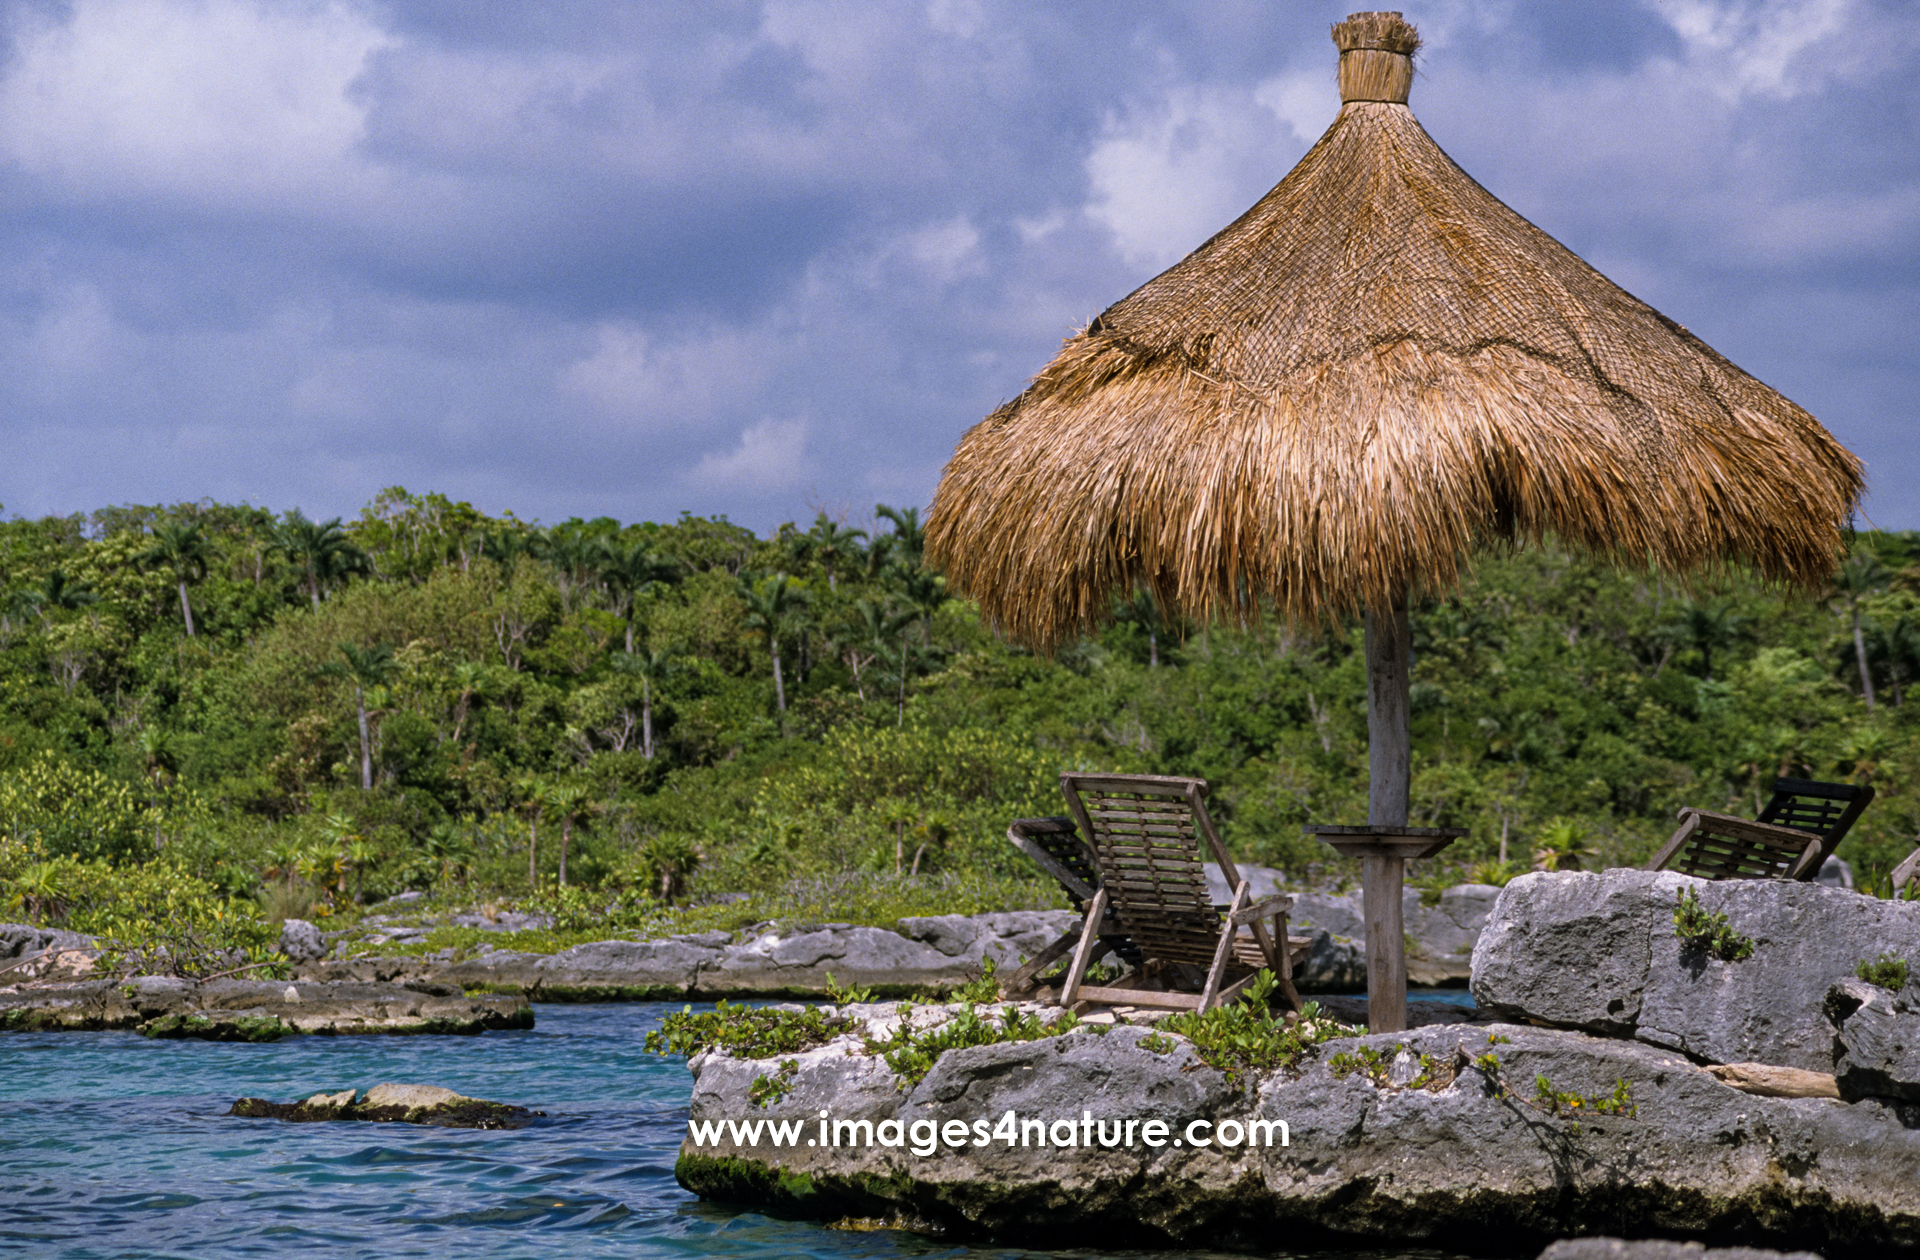 Sunshade and wooden chairs located on rocks of a tropical bay